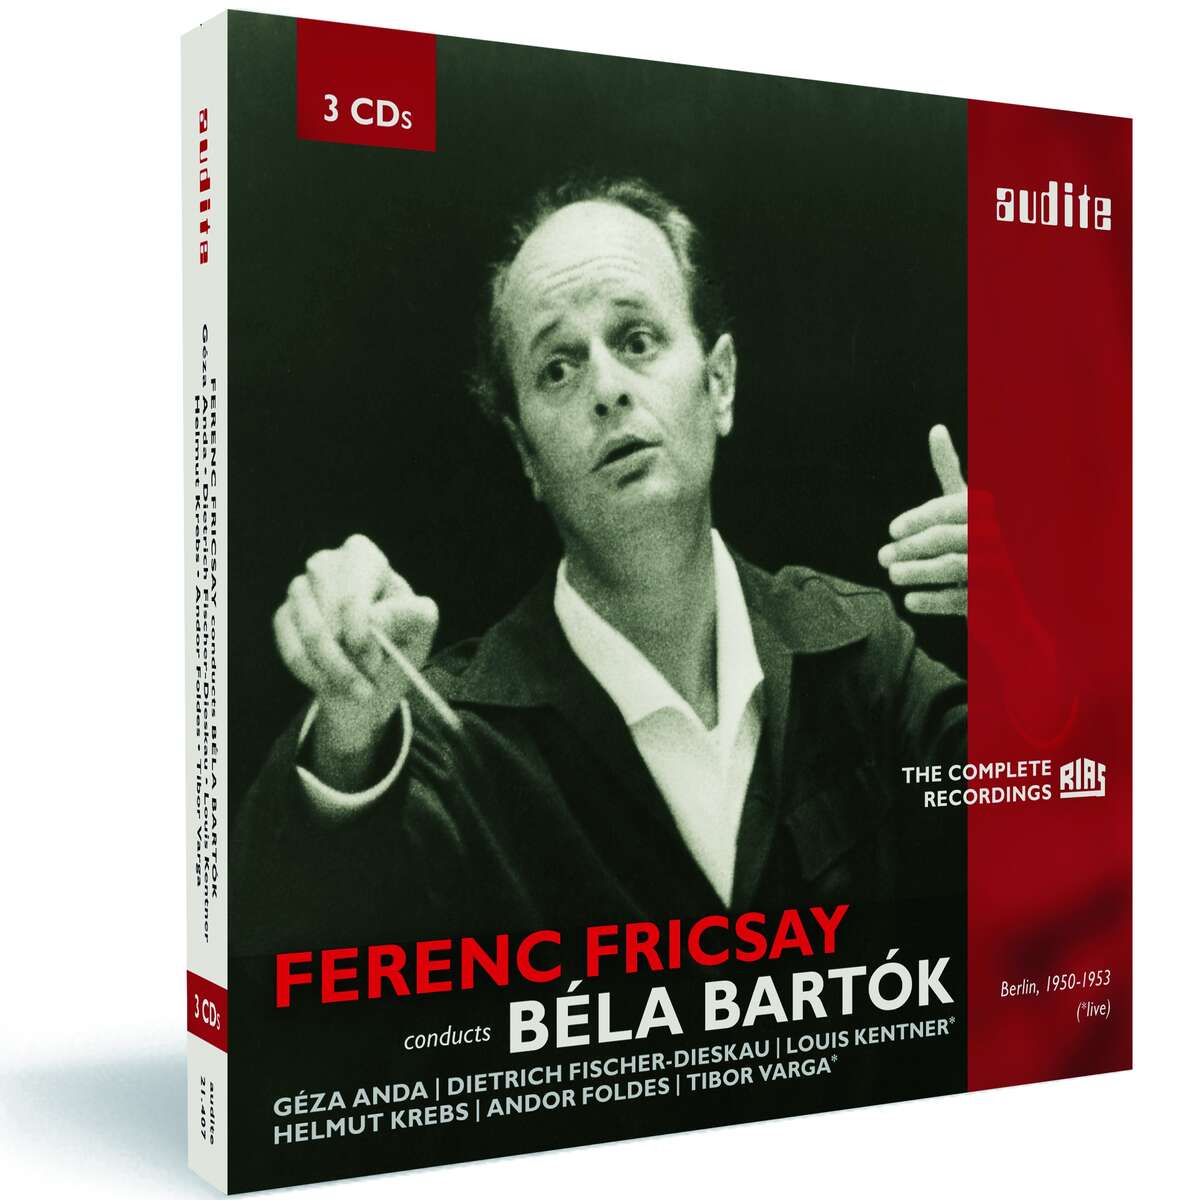 Ferenc Fricsay conducts Béla Bartok – The early RIAS... audite